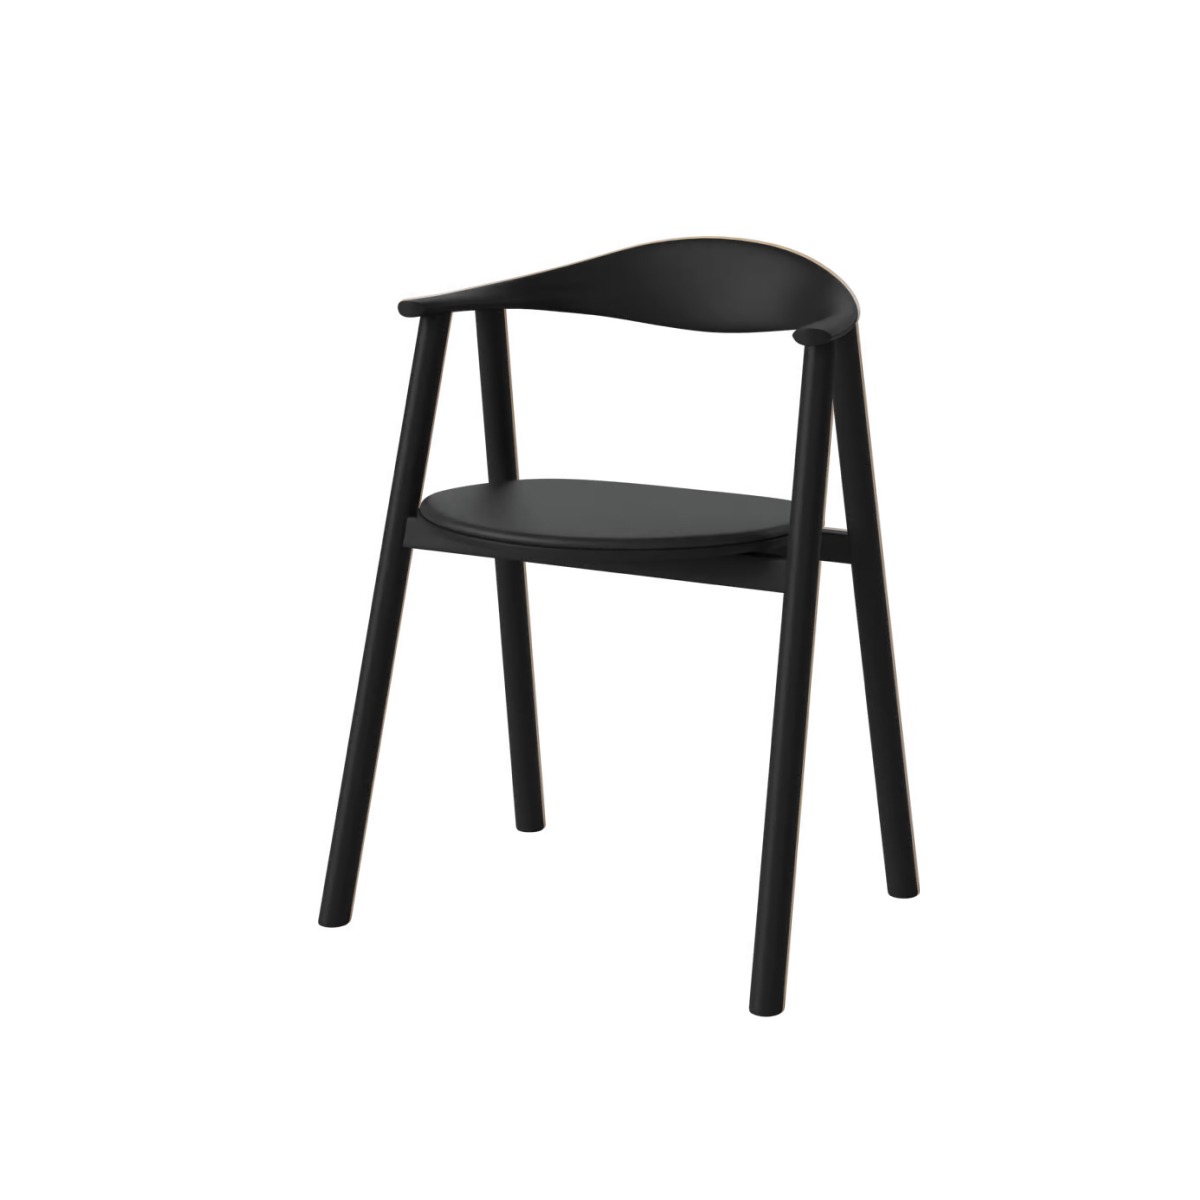 BOLIA Swing Upholstered Dining Chair - Black